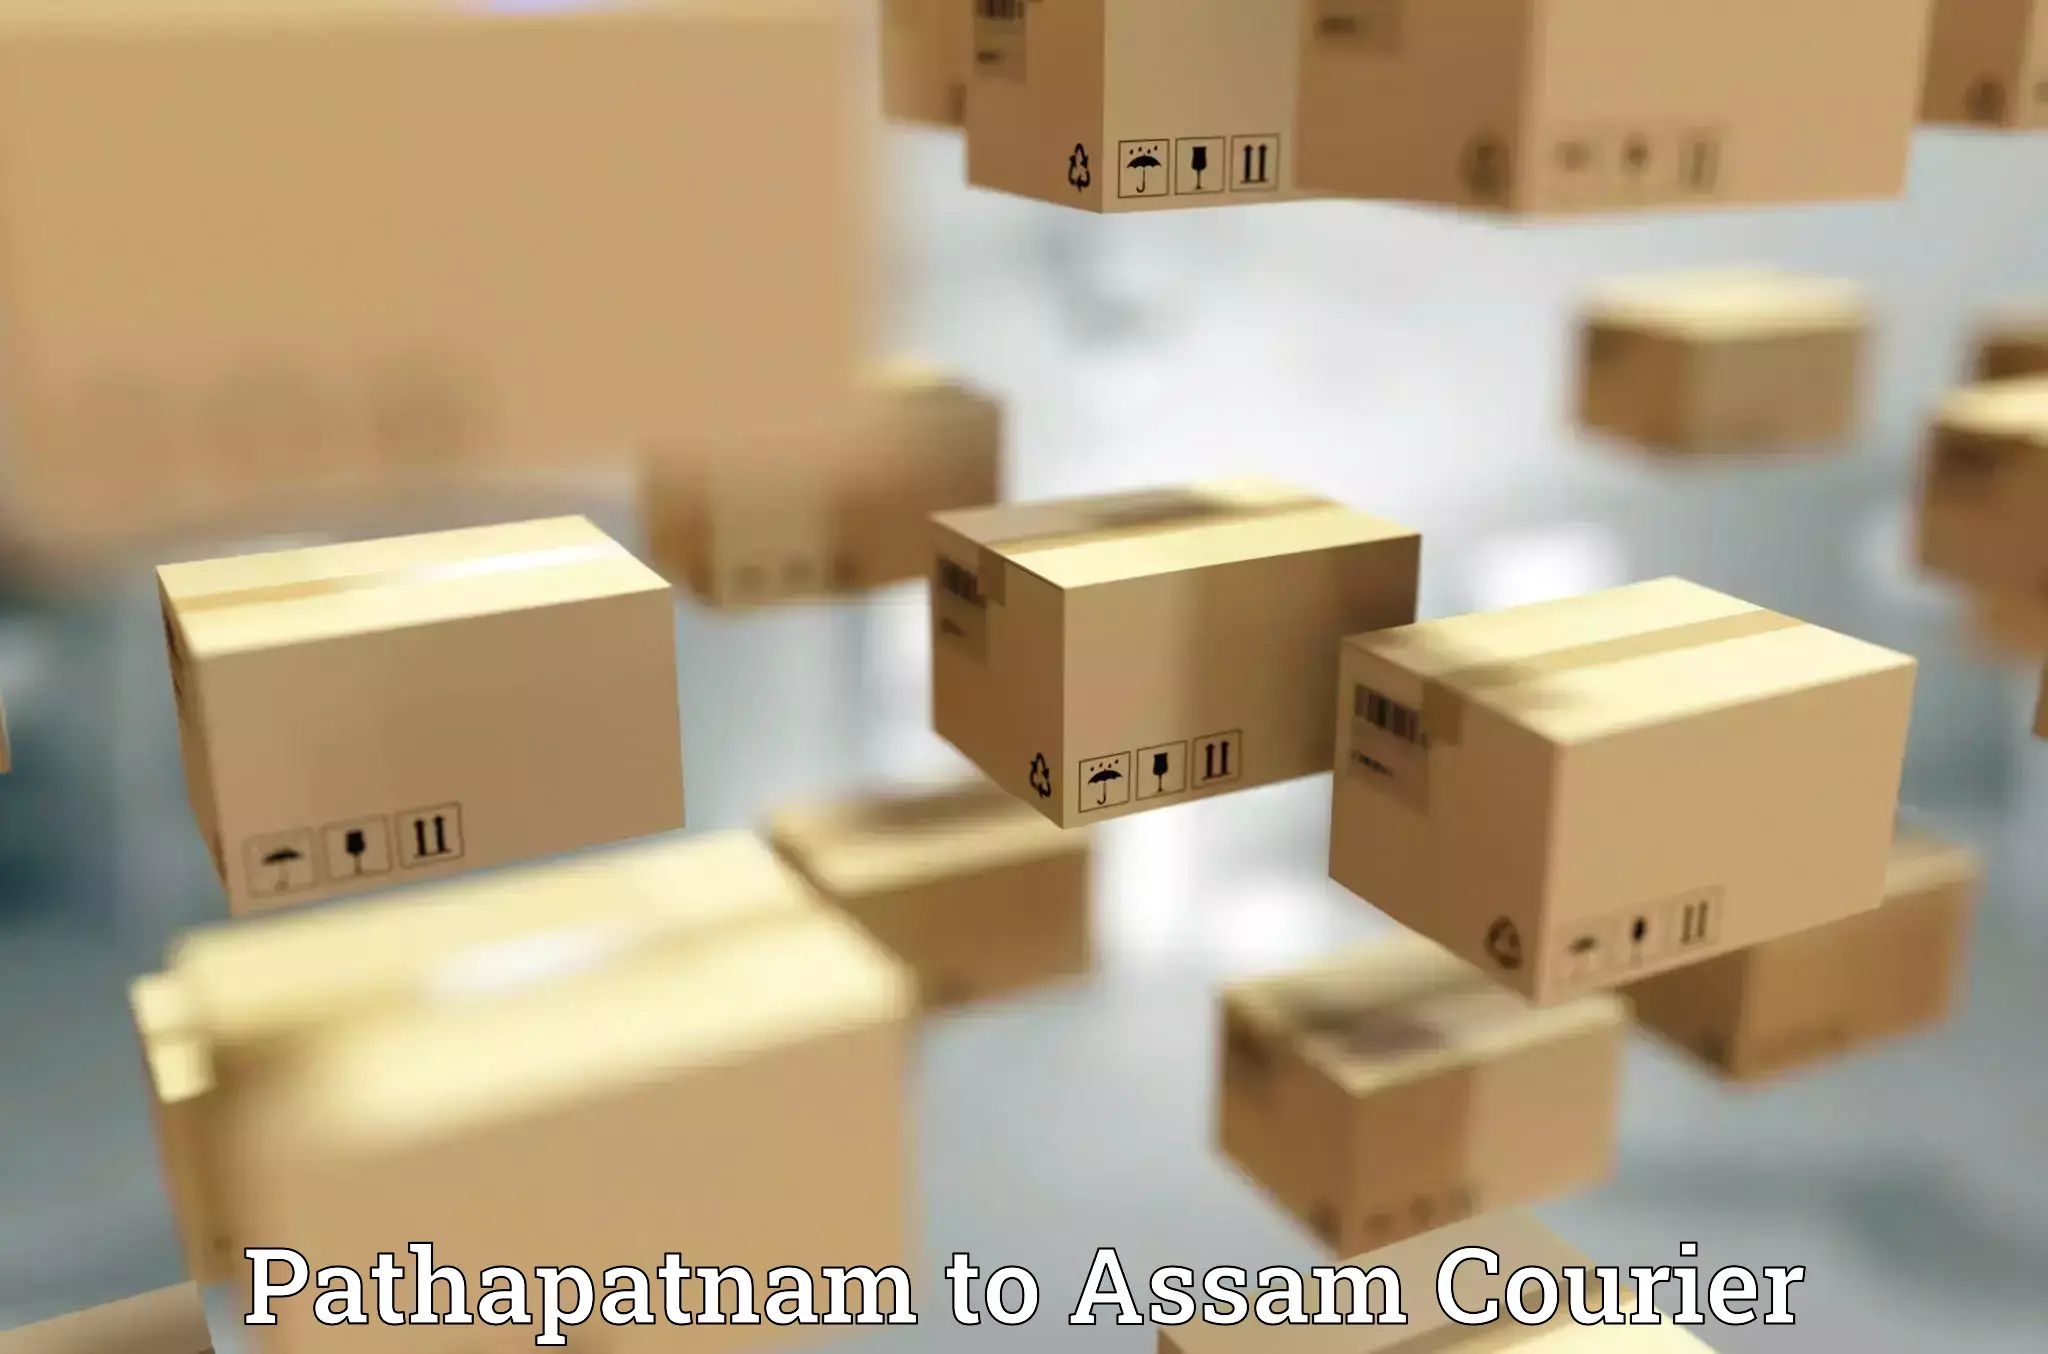 Delivery service partnership Pathapatnam to Assam